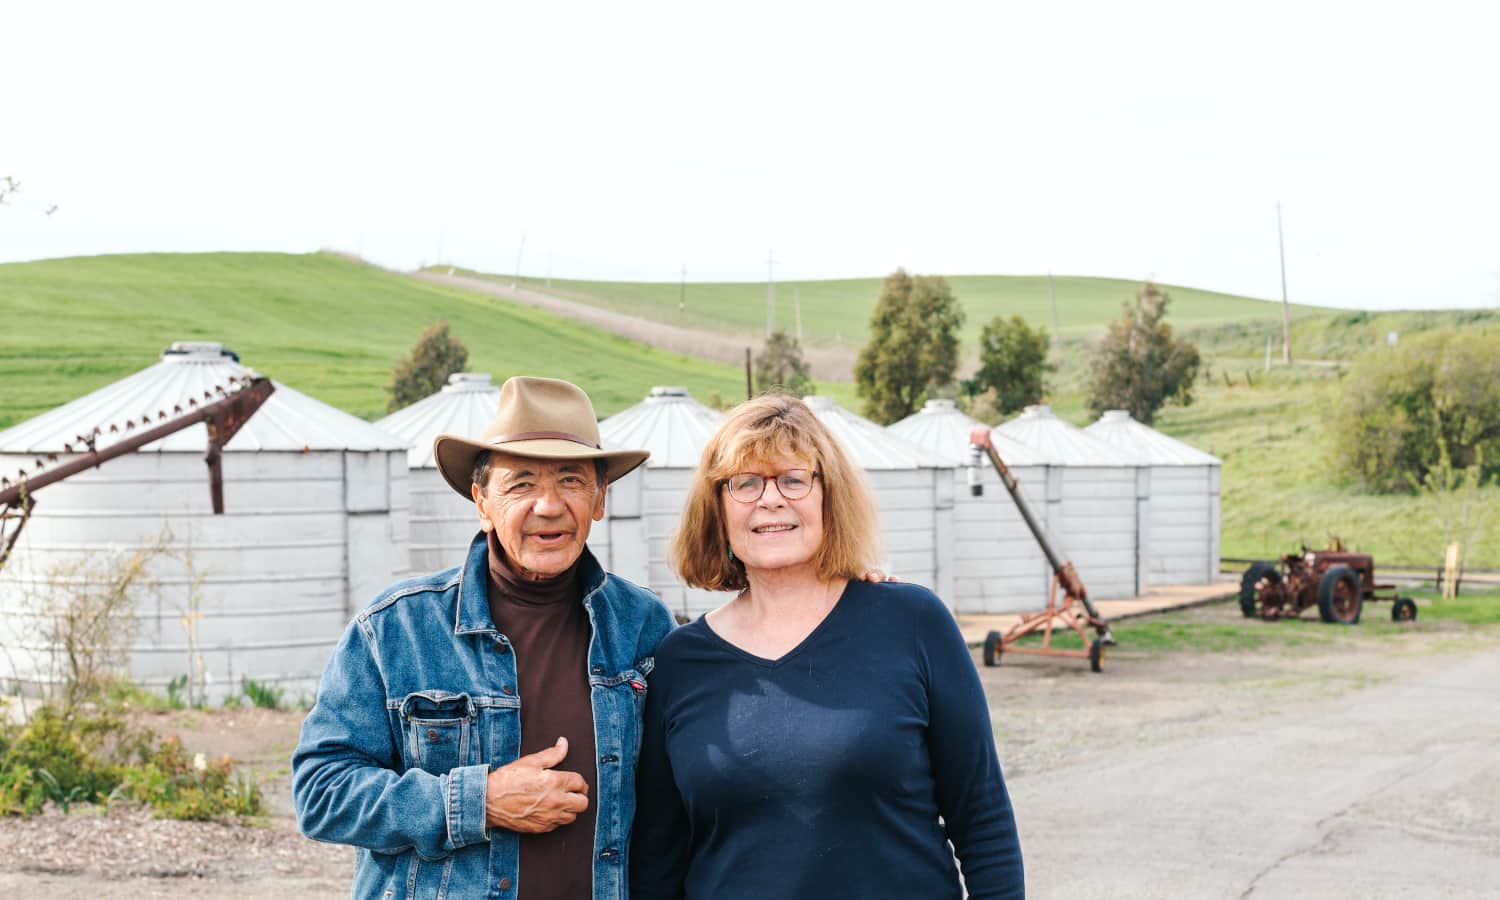 In this month’s Niman Ranch Farmer Friday Feature, we talk with Jeanne McCormack of Dan McCormack Farms about her family’s sheep farm in the Montezuma Hills.